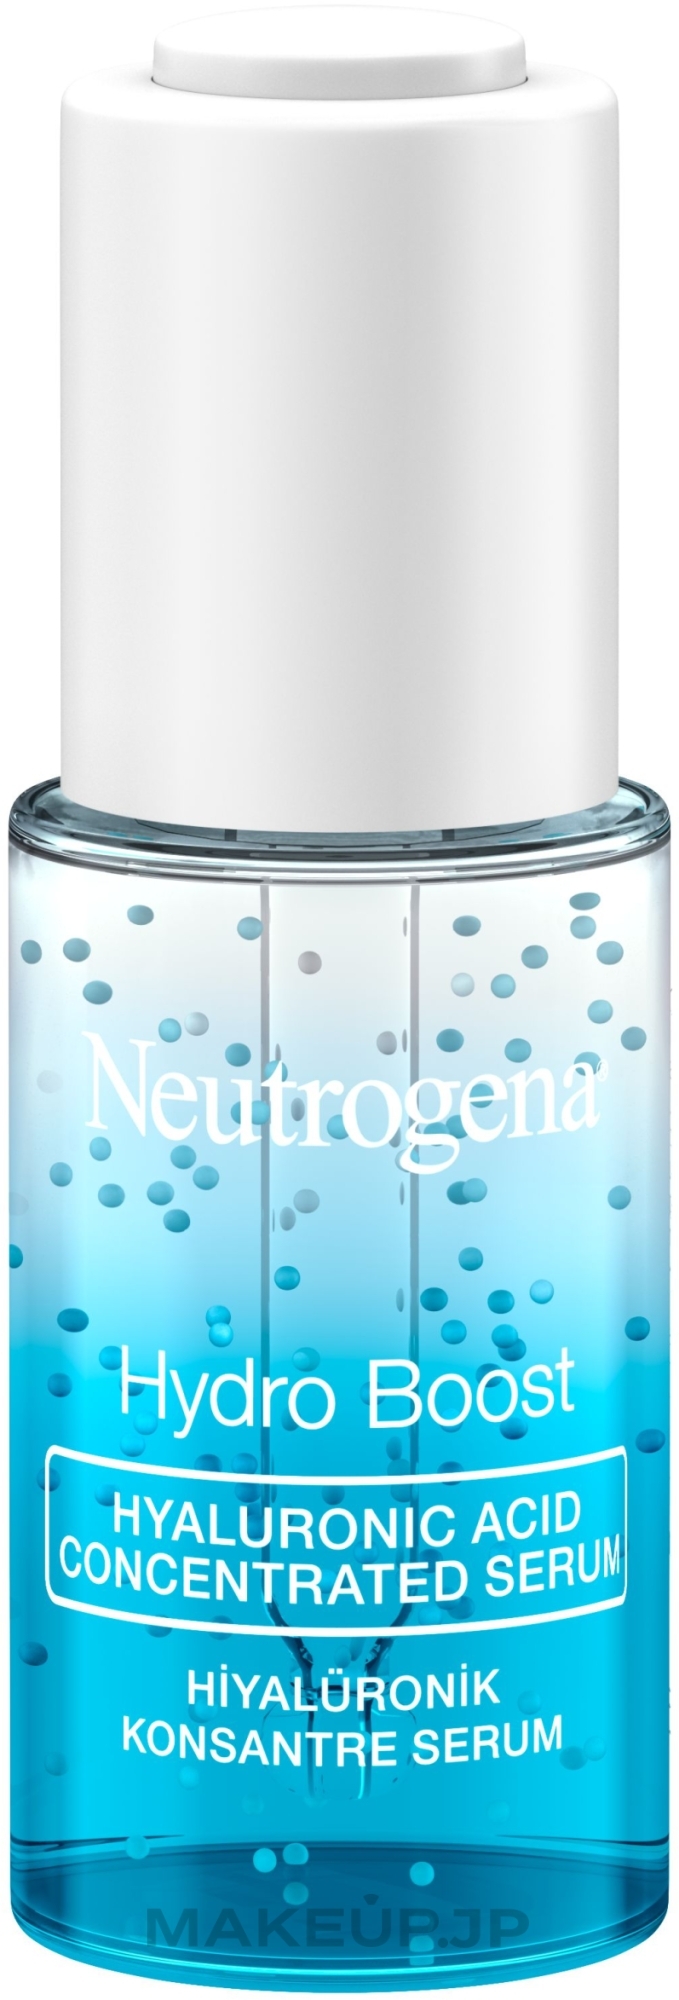 Concentrated Hyaluronic Acid Serum - Neutrogena Hydro Boost Hyaluronic Acid Concentrated Serum — photo 15 ml